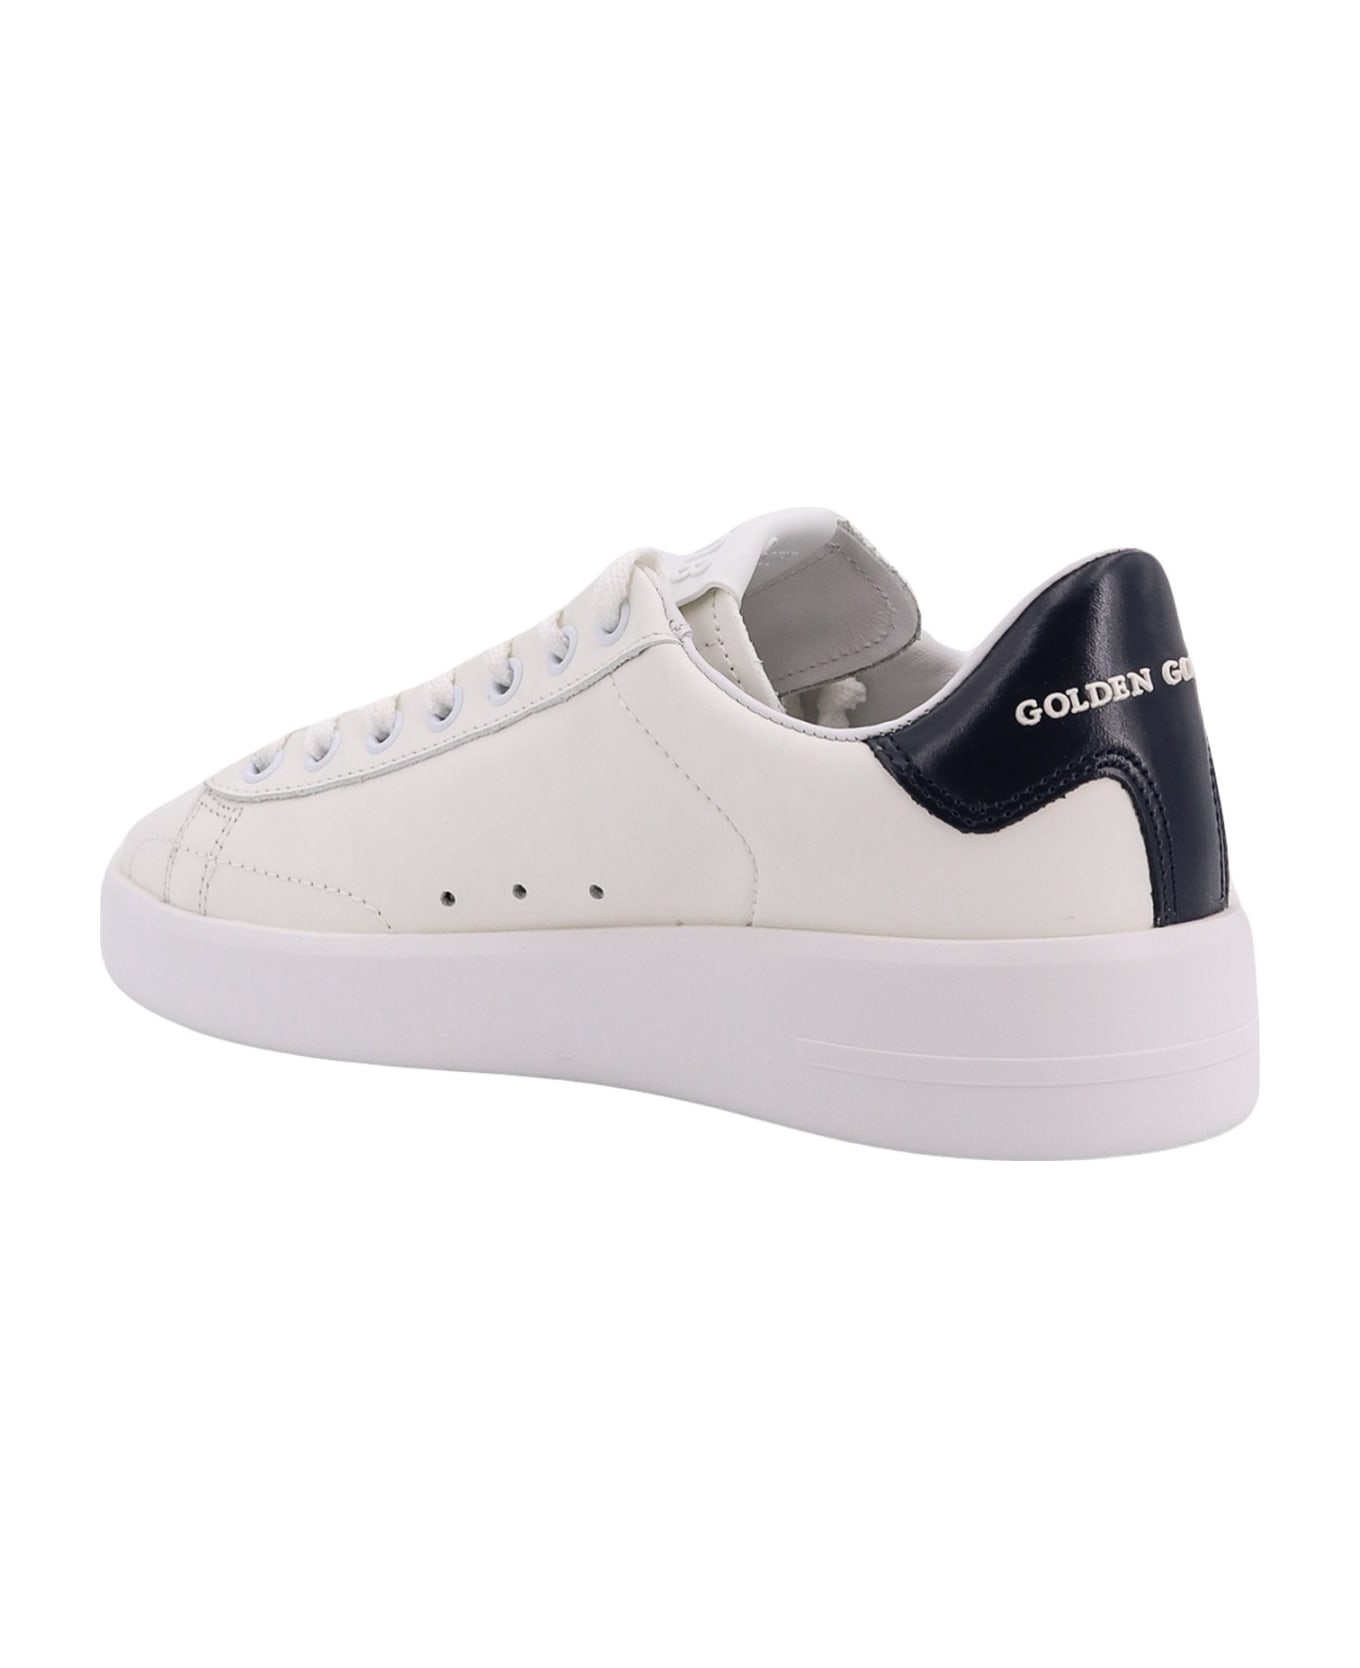 Golden Goose Pure New Sneakers - WHITE/BLUE   スニーカー